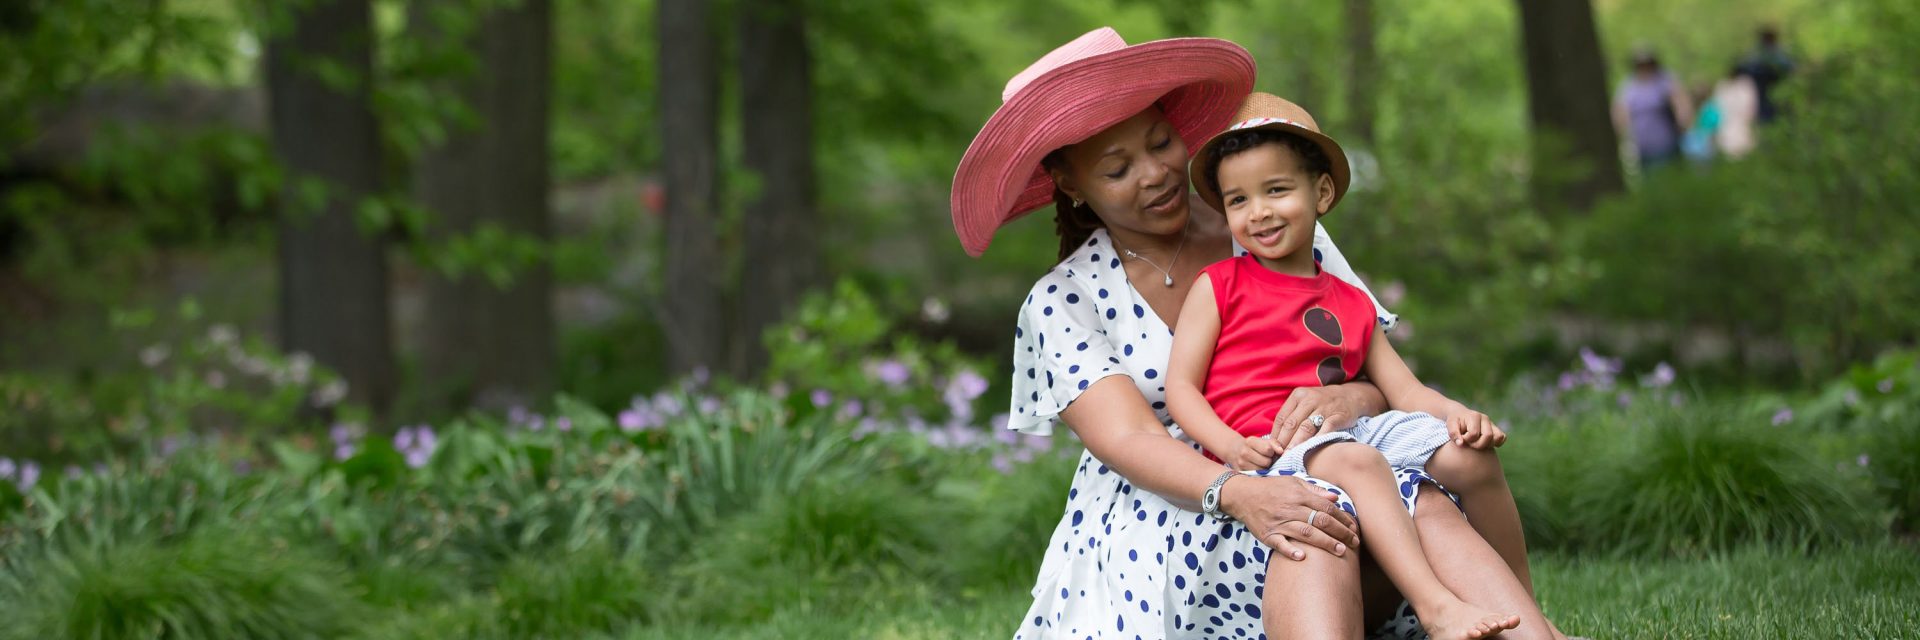 Mother’s Day Weekend Garden Party at The New York Botanical Garden